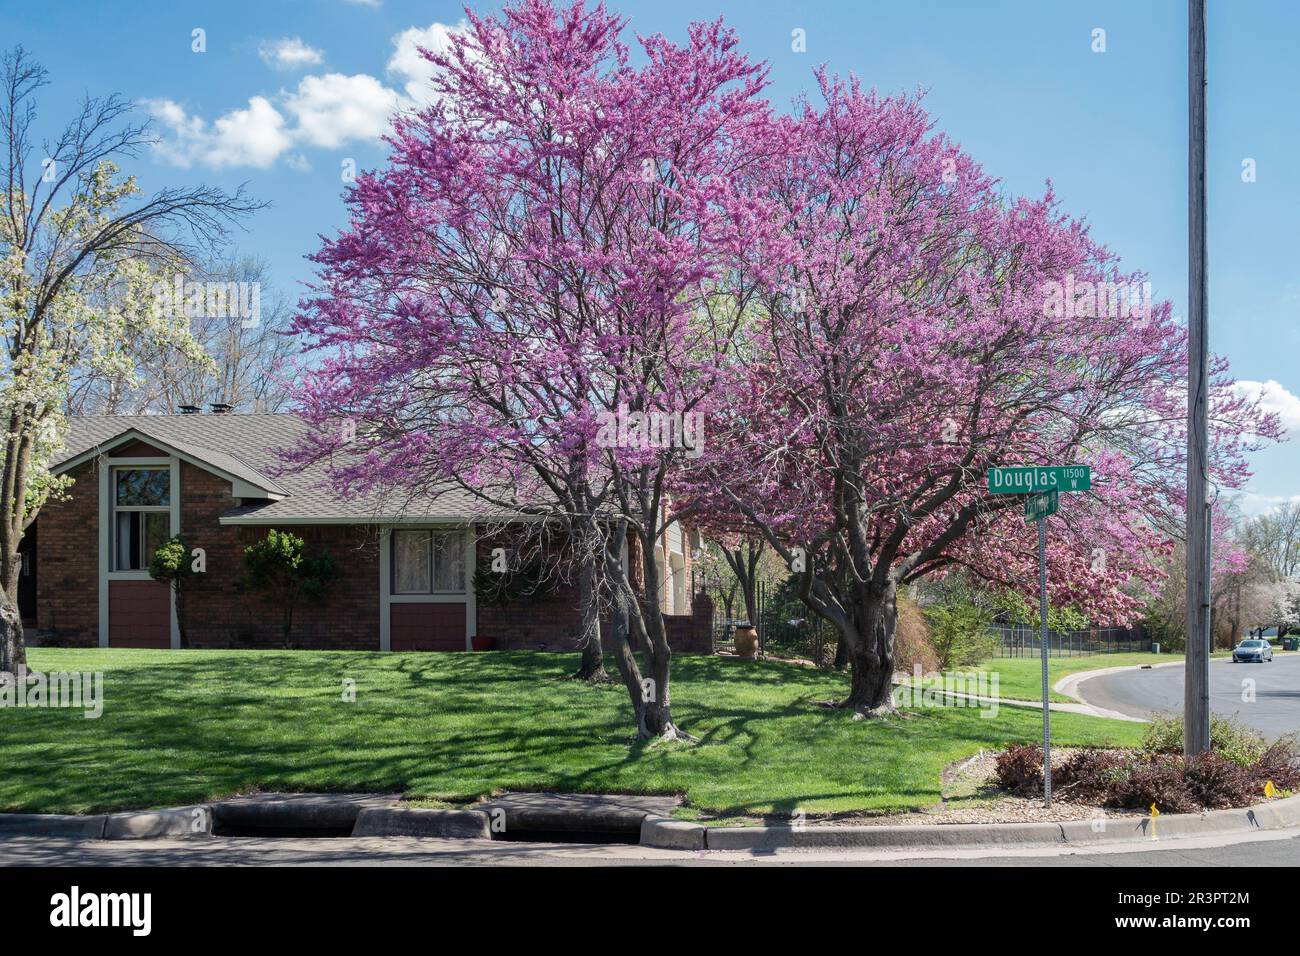 Two blooming Eastern redbud trees, Cercis canadensis, on a corner property in a neighborhood of Wichita, Kansas, USA. Stock Photo